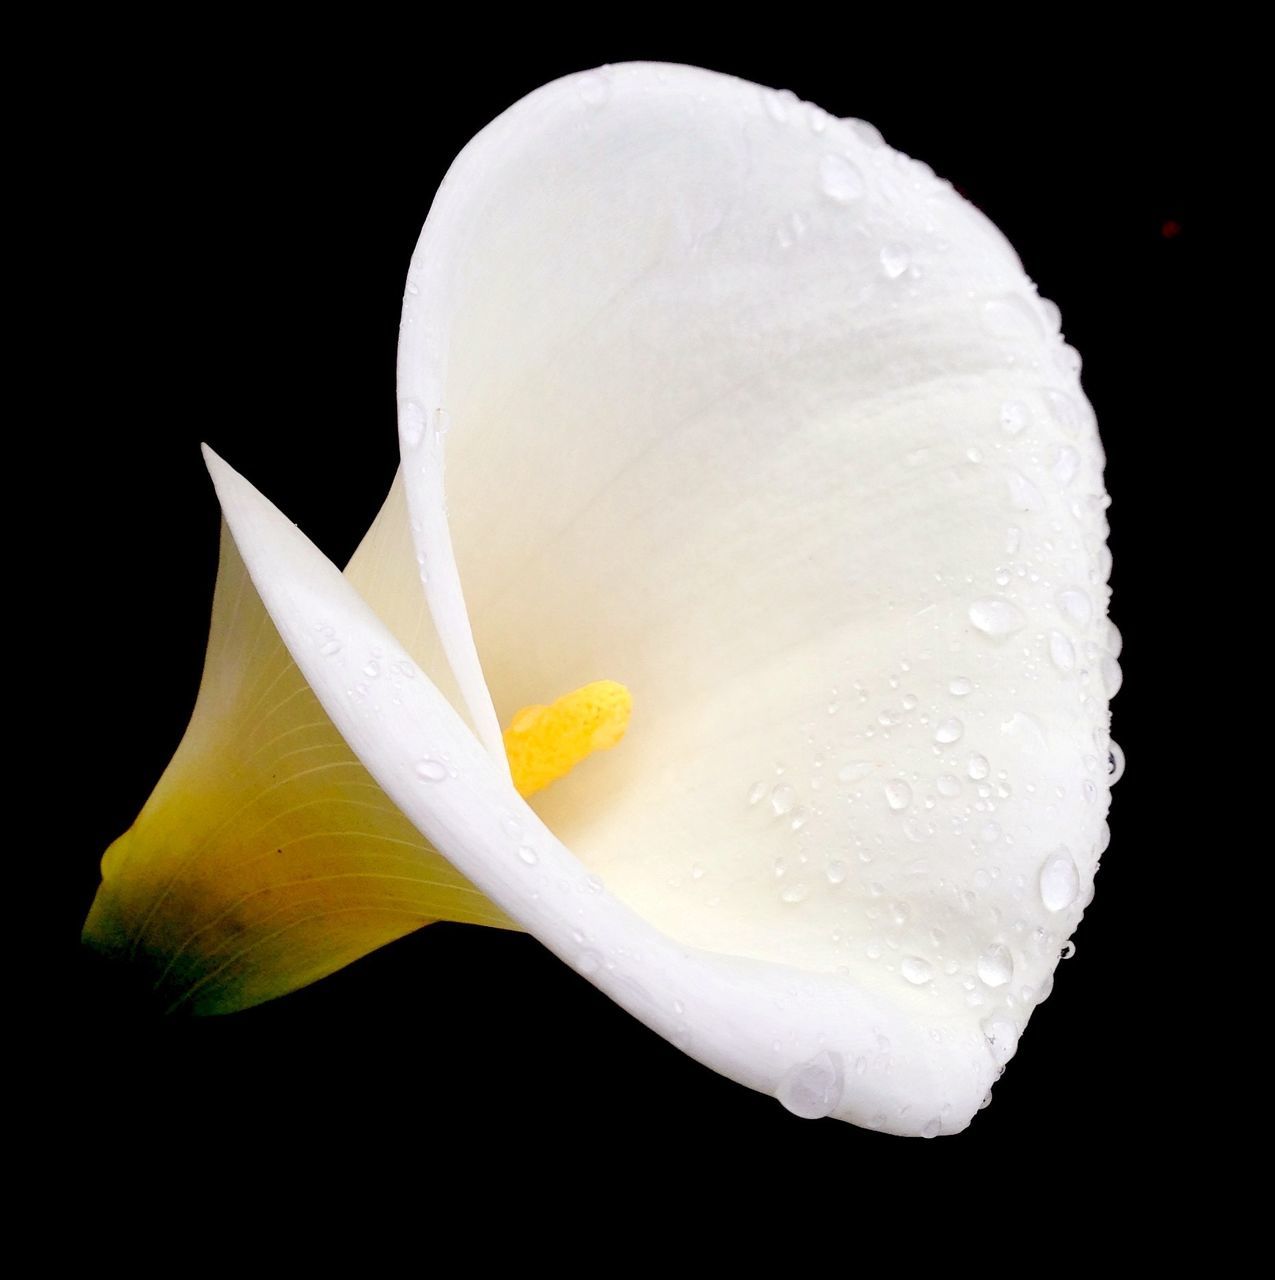 studio shot, black background, freshness, flower, flower head, single flower, petal, close-up, fragility, white color, beauty in nature, water, yellow, nature, drop, white, single object, no people, stamen, wet